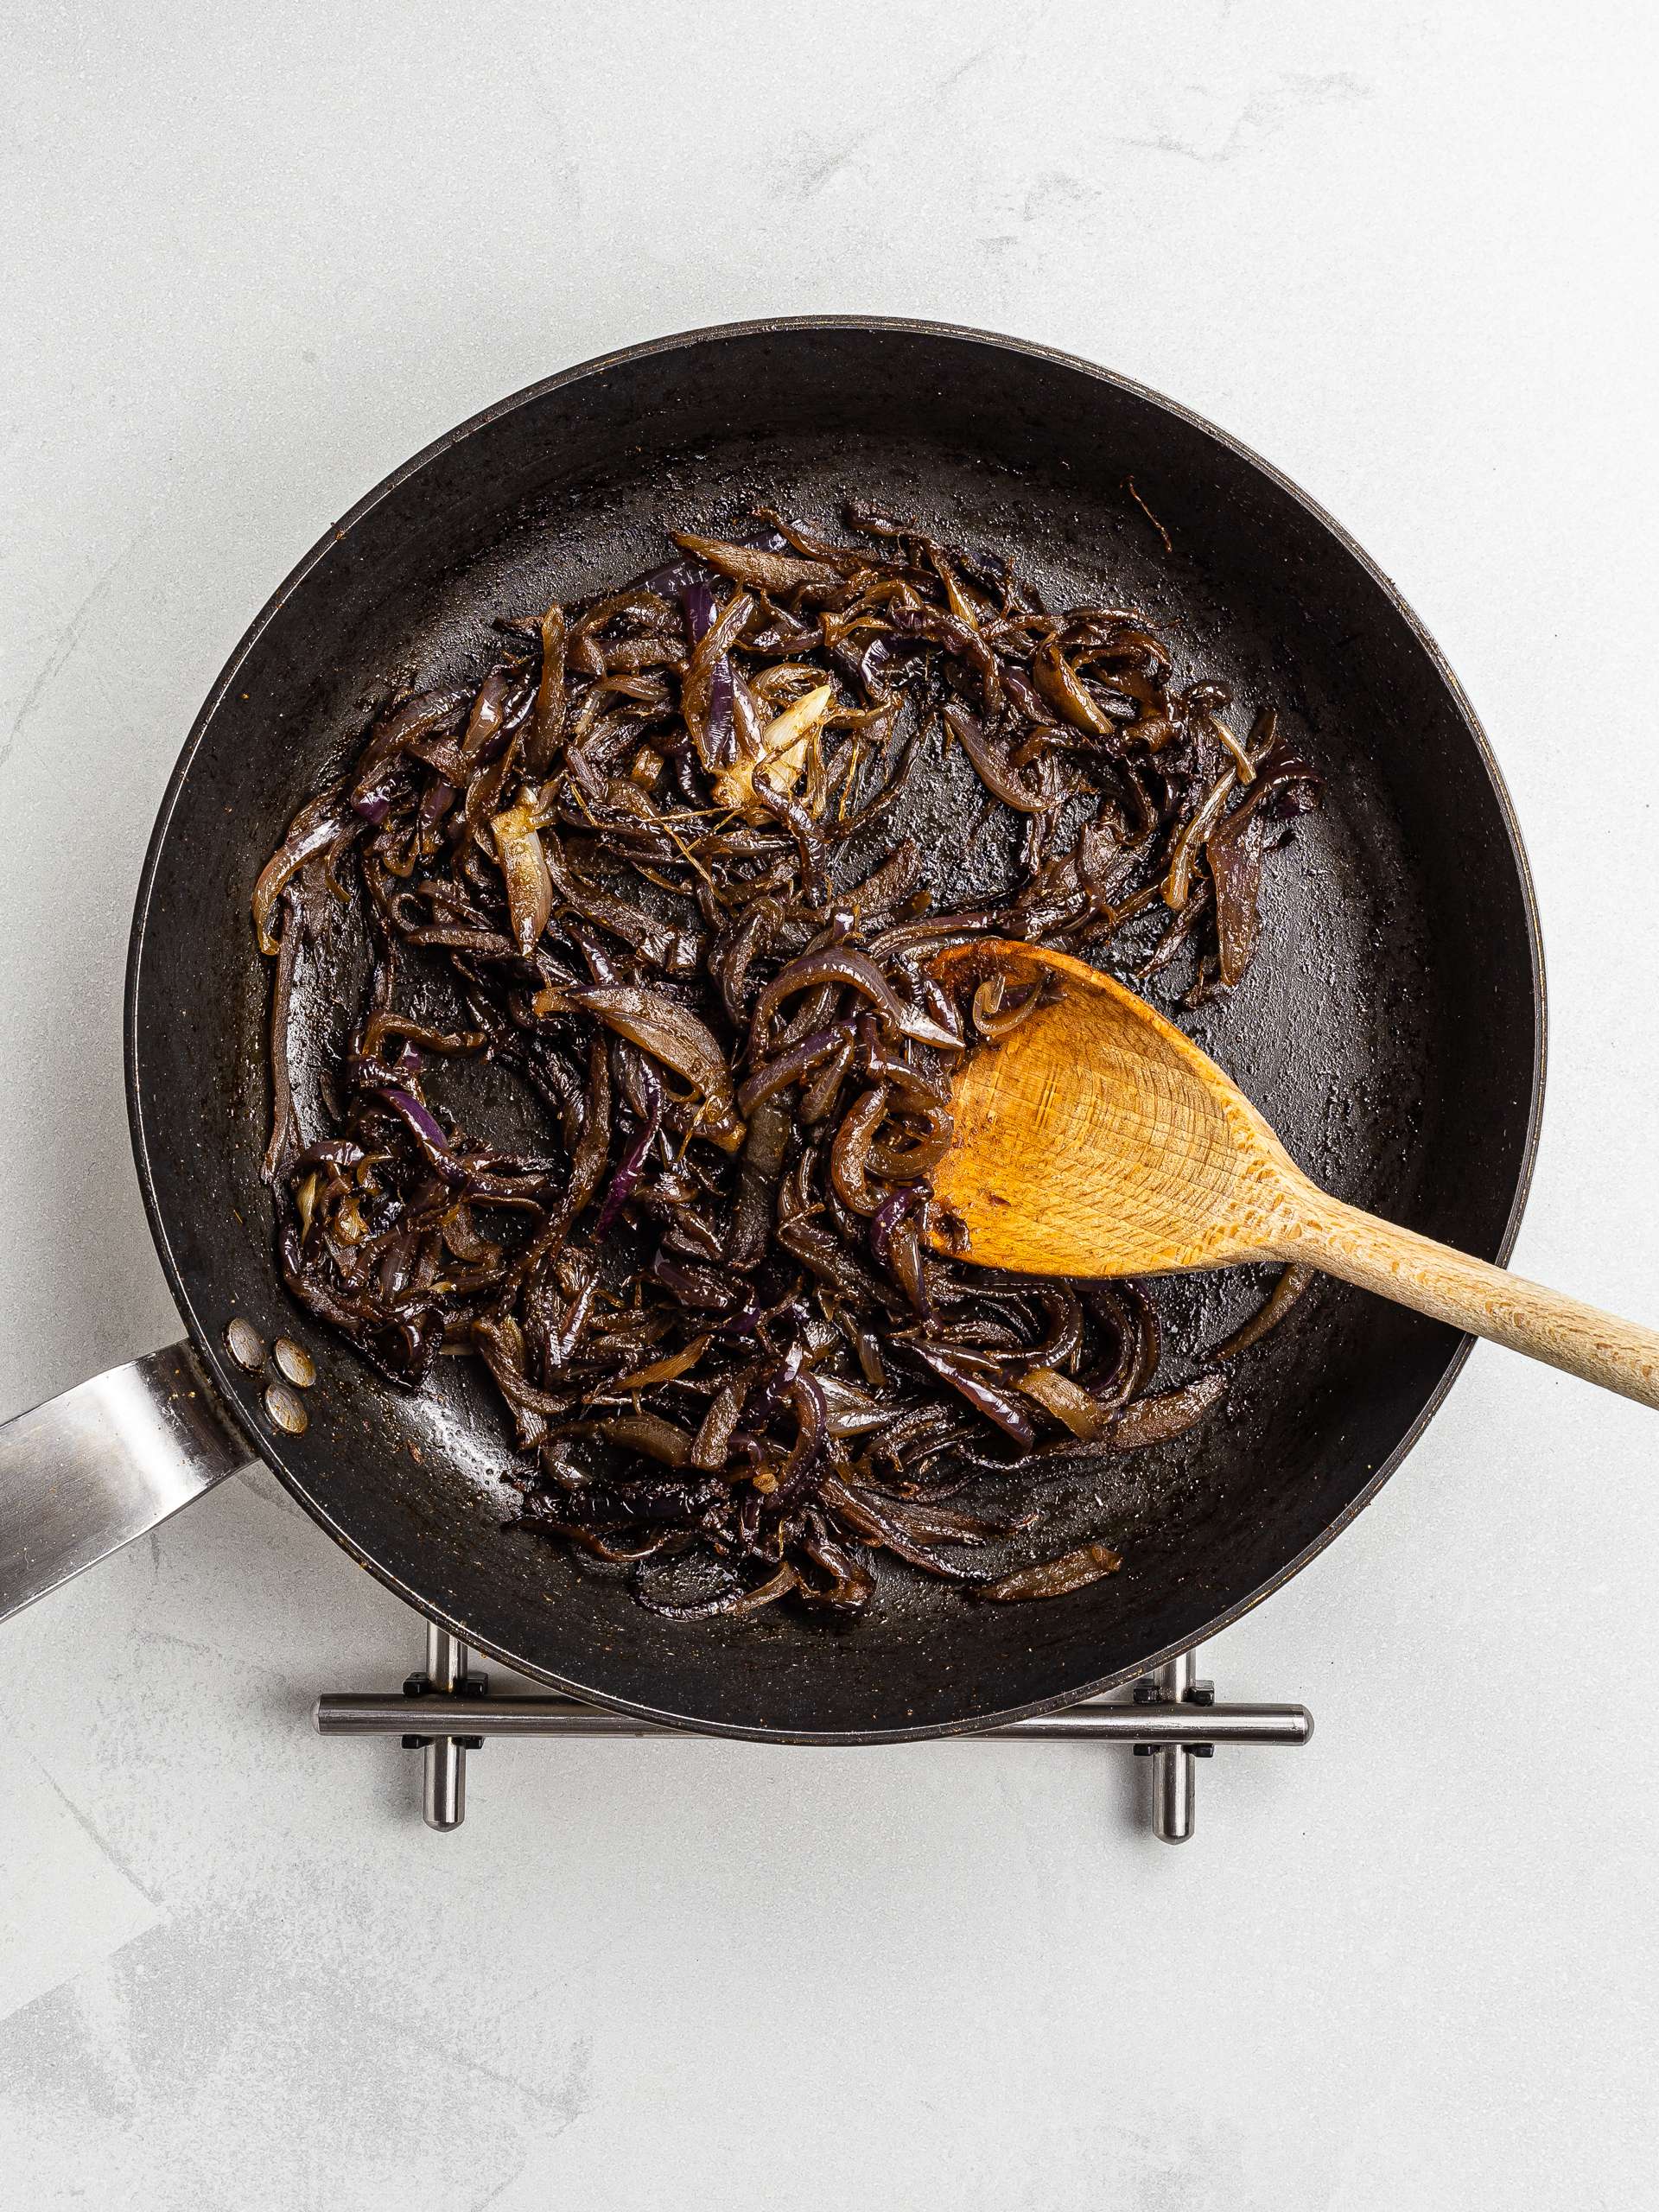 caramelised onions in a skillet